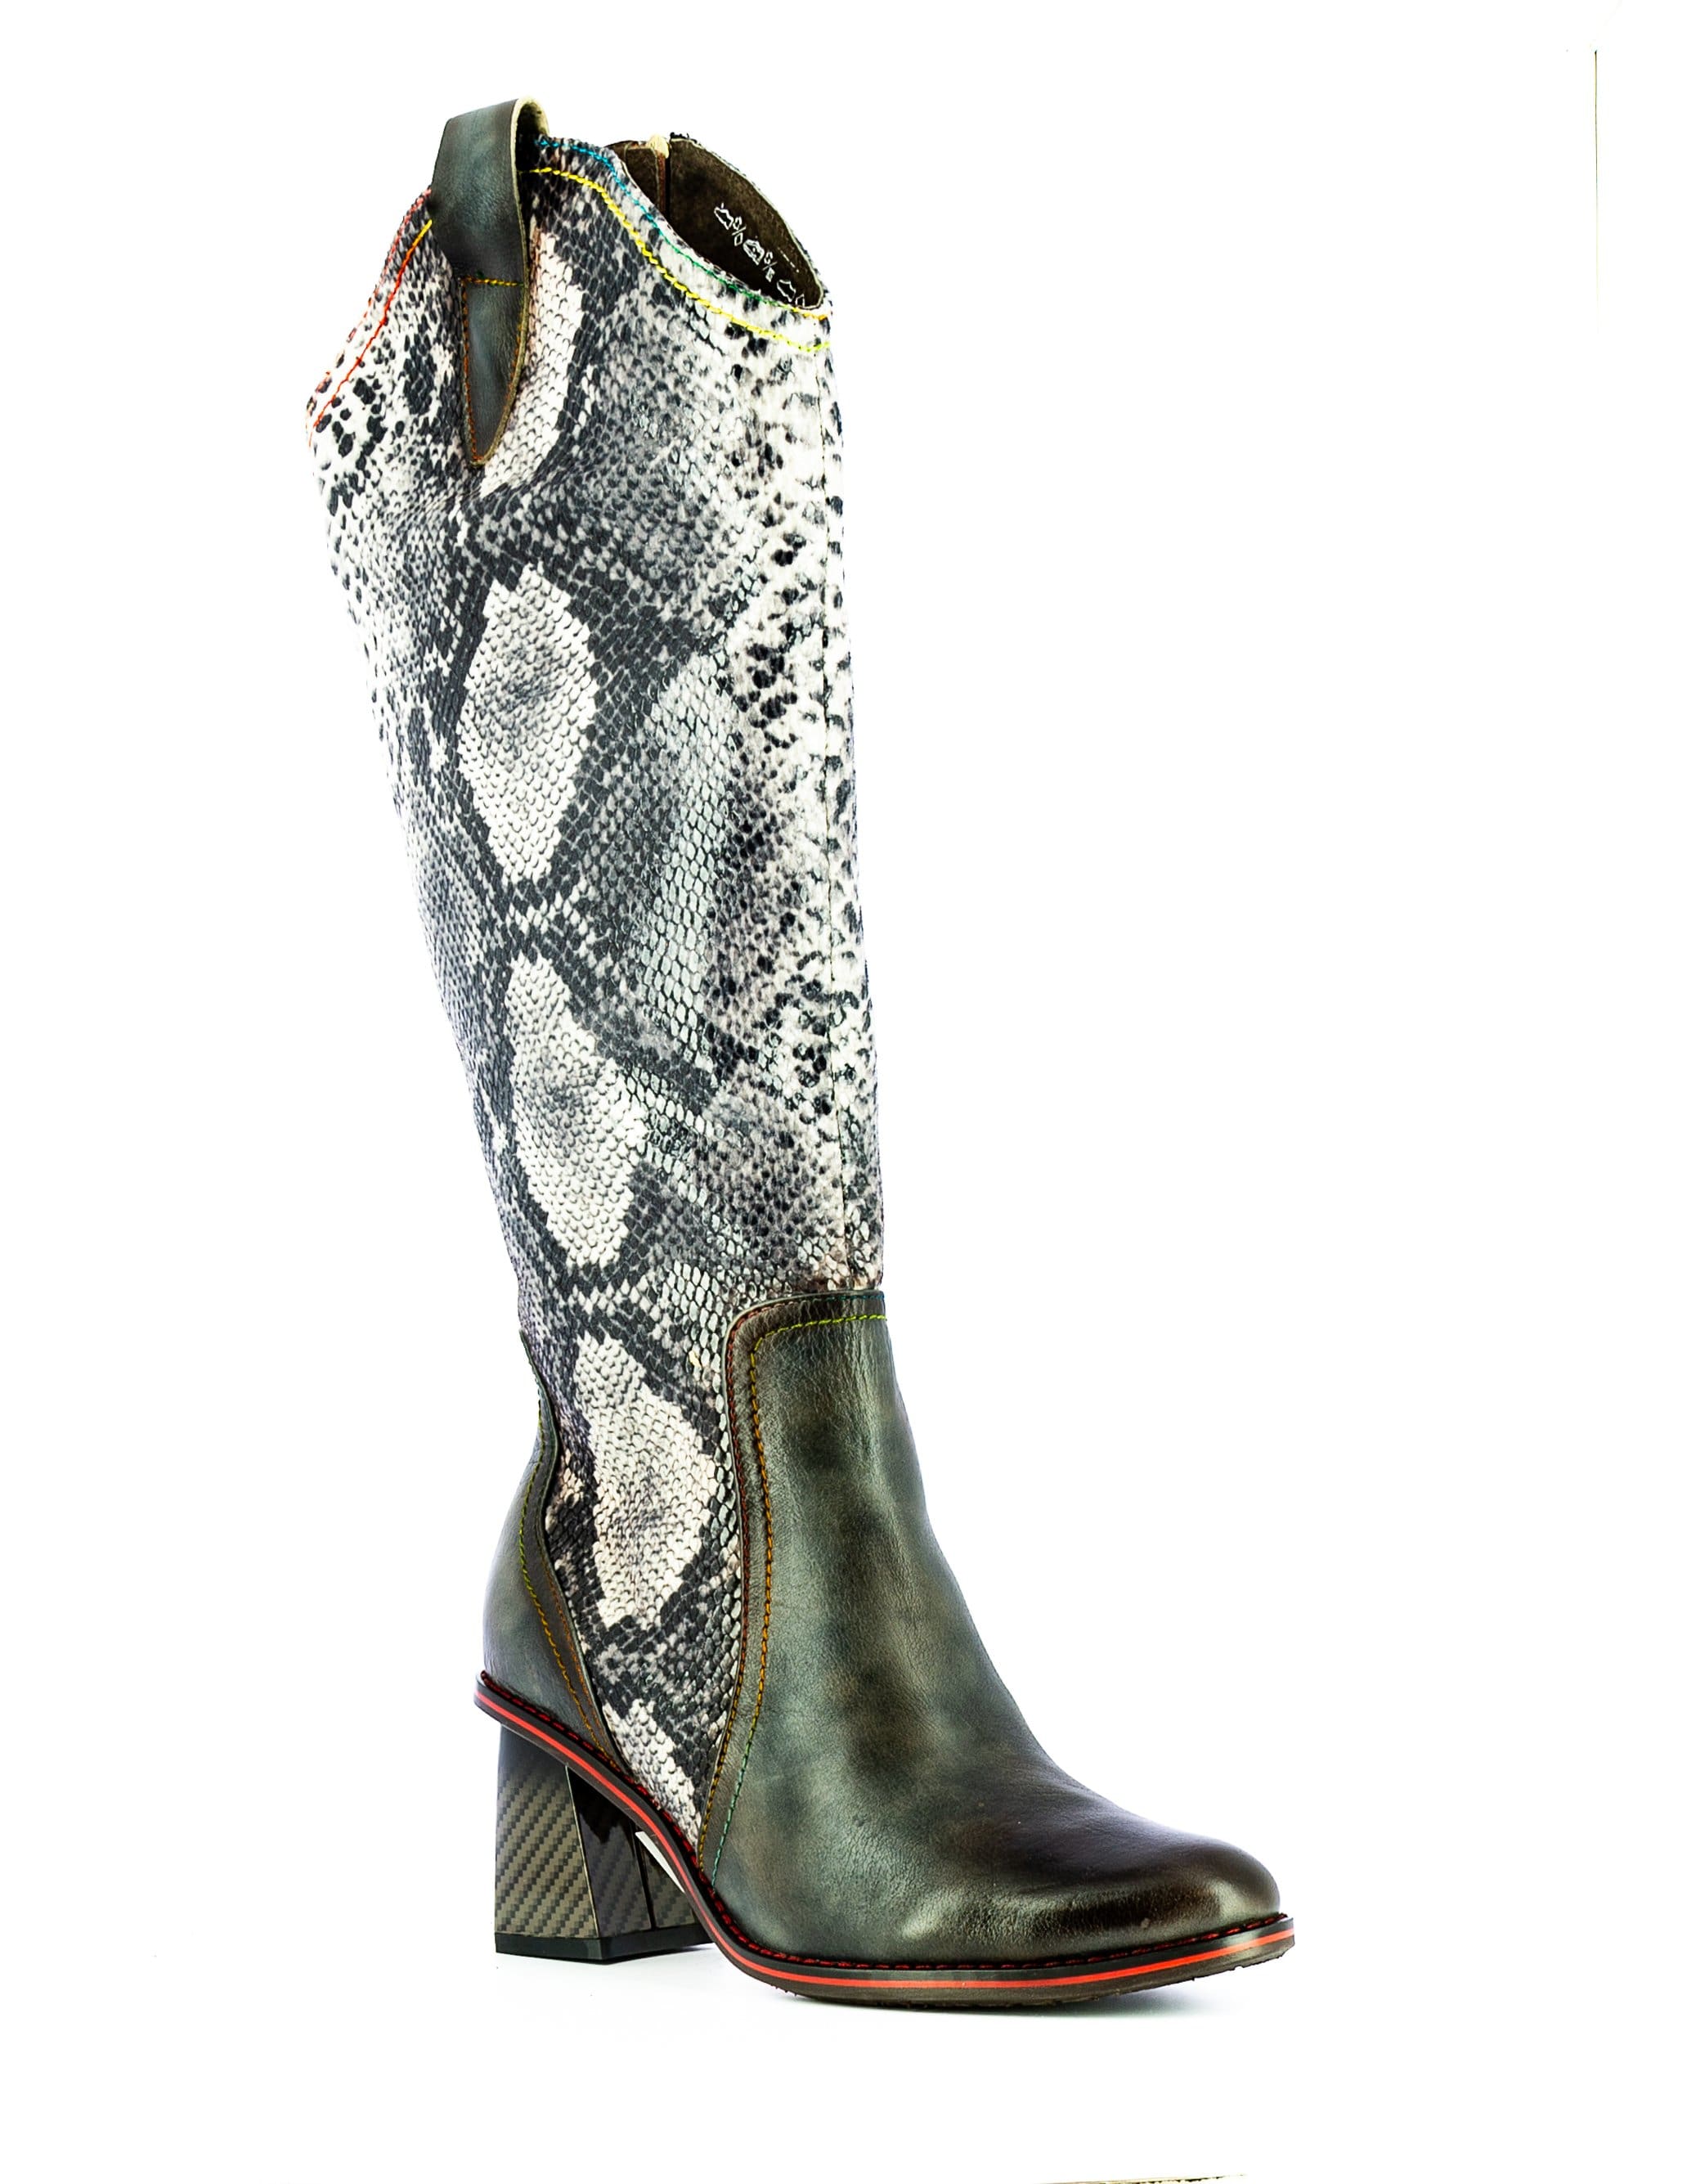 Schuh IDCALINAO 05 - Stiefel